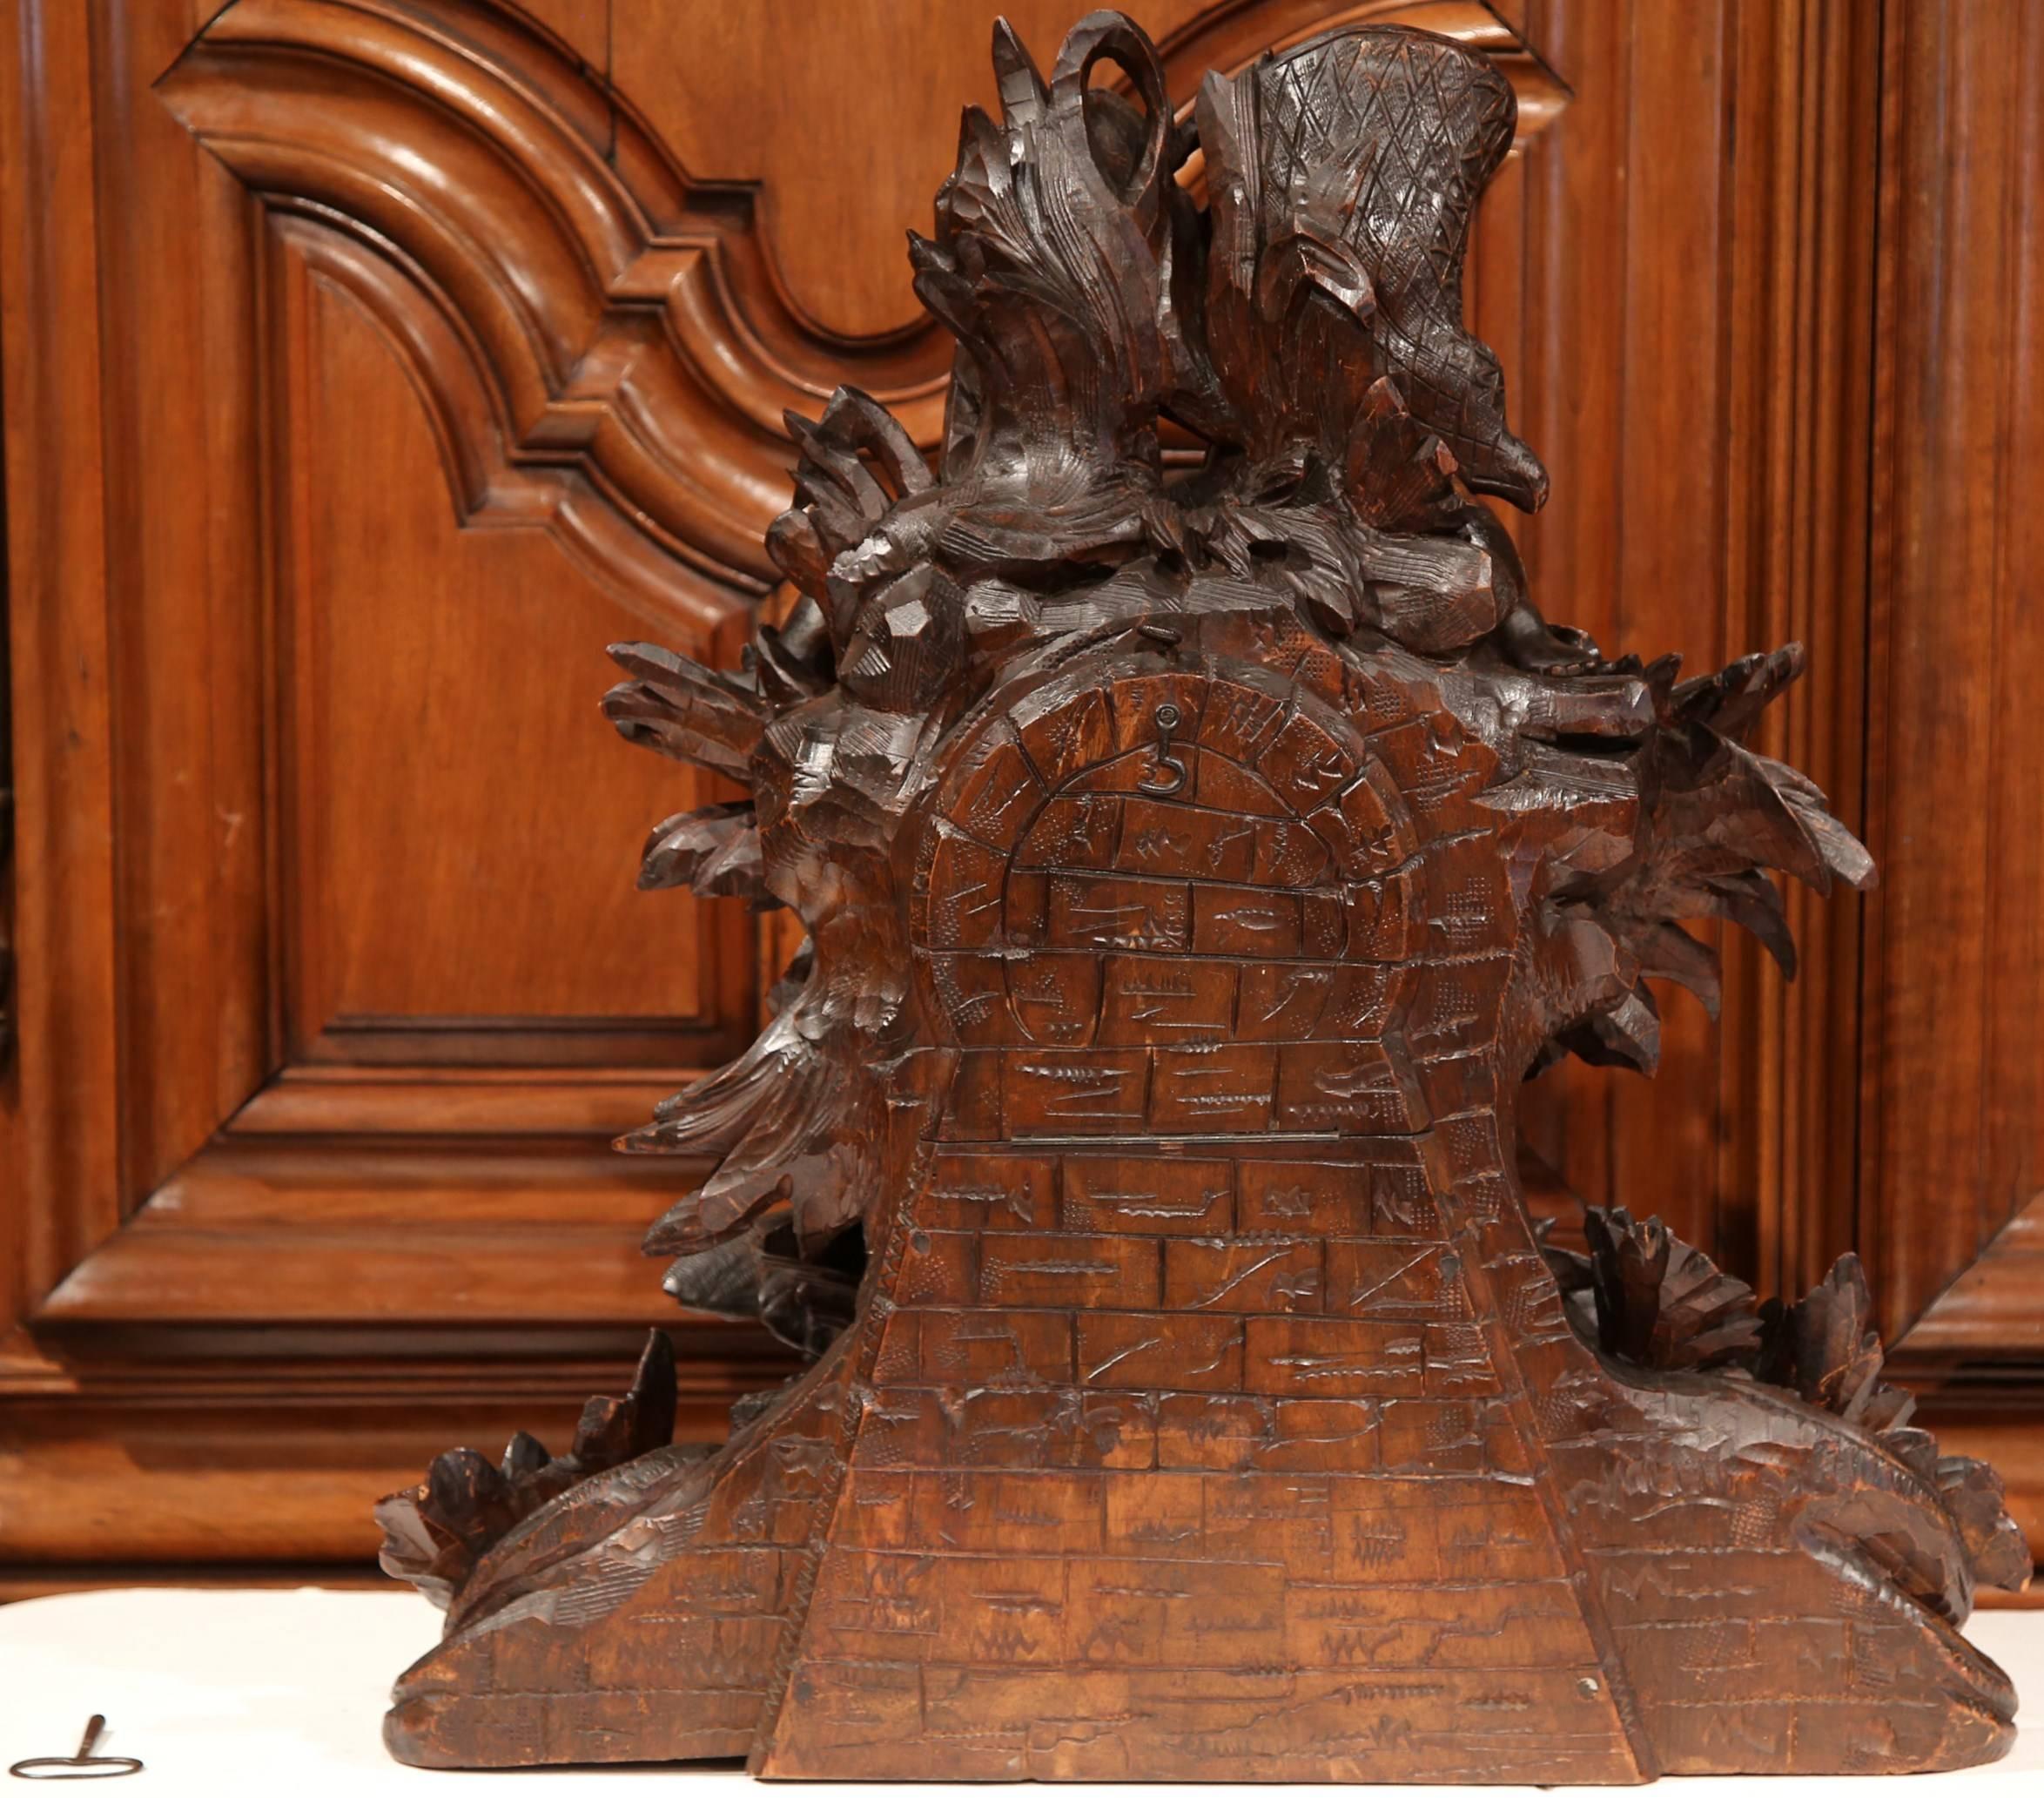 19th Century Swiss Black Forest Carved Walnut Mantel Clock with Cherubs and Bird For Sale 2